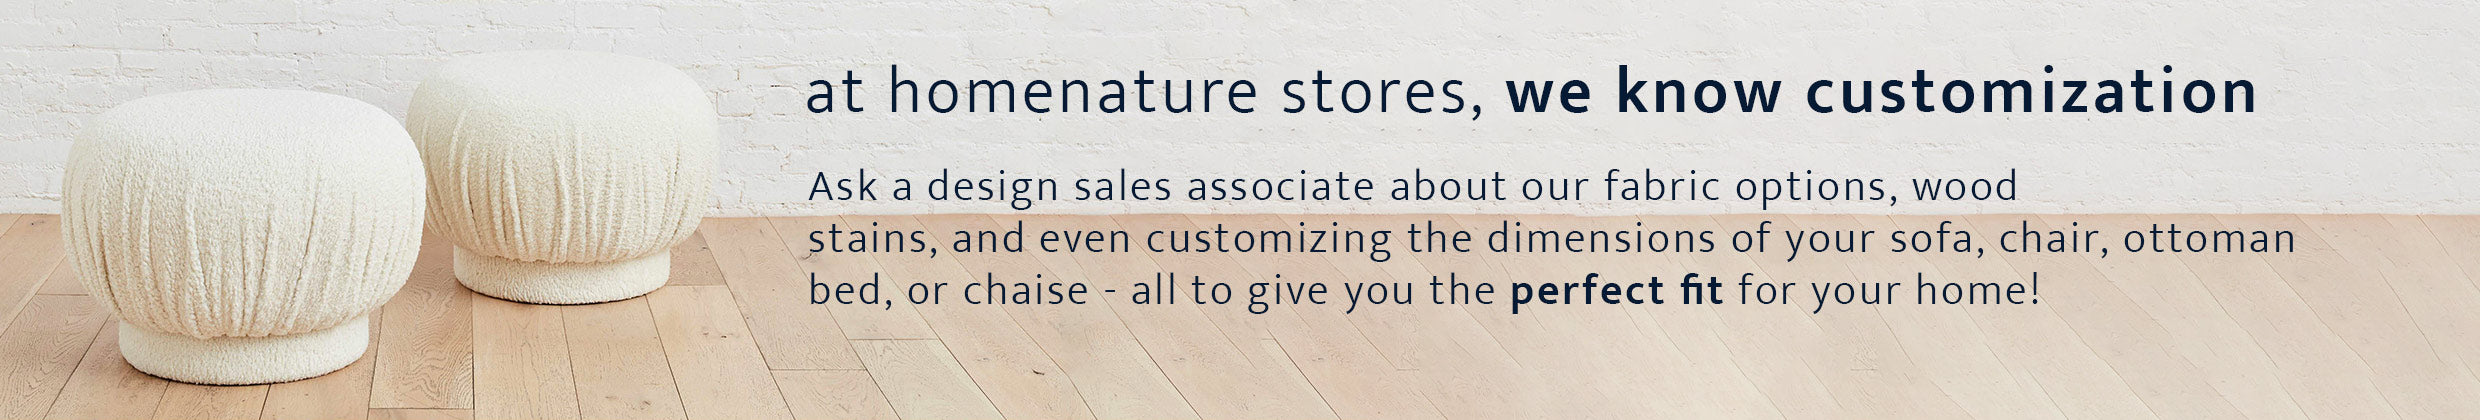 fabric and wood stain customization at homenature stores in NYC and southampton